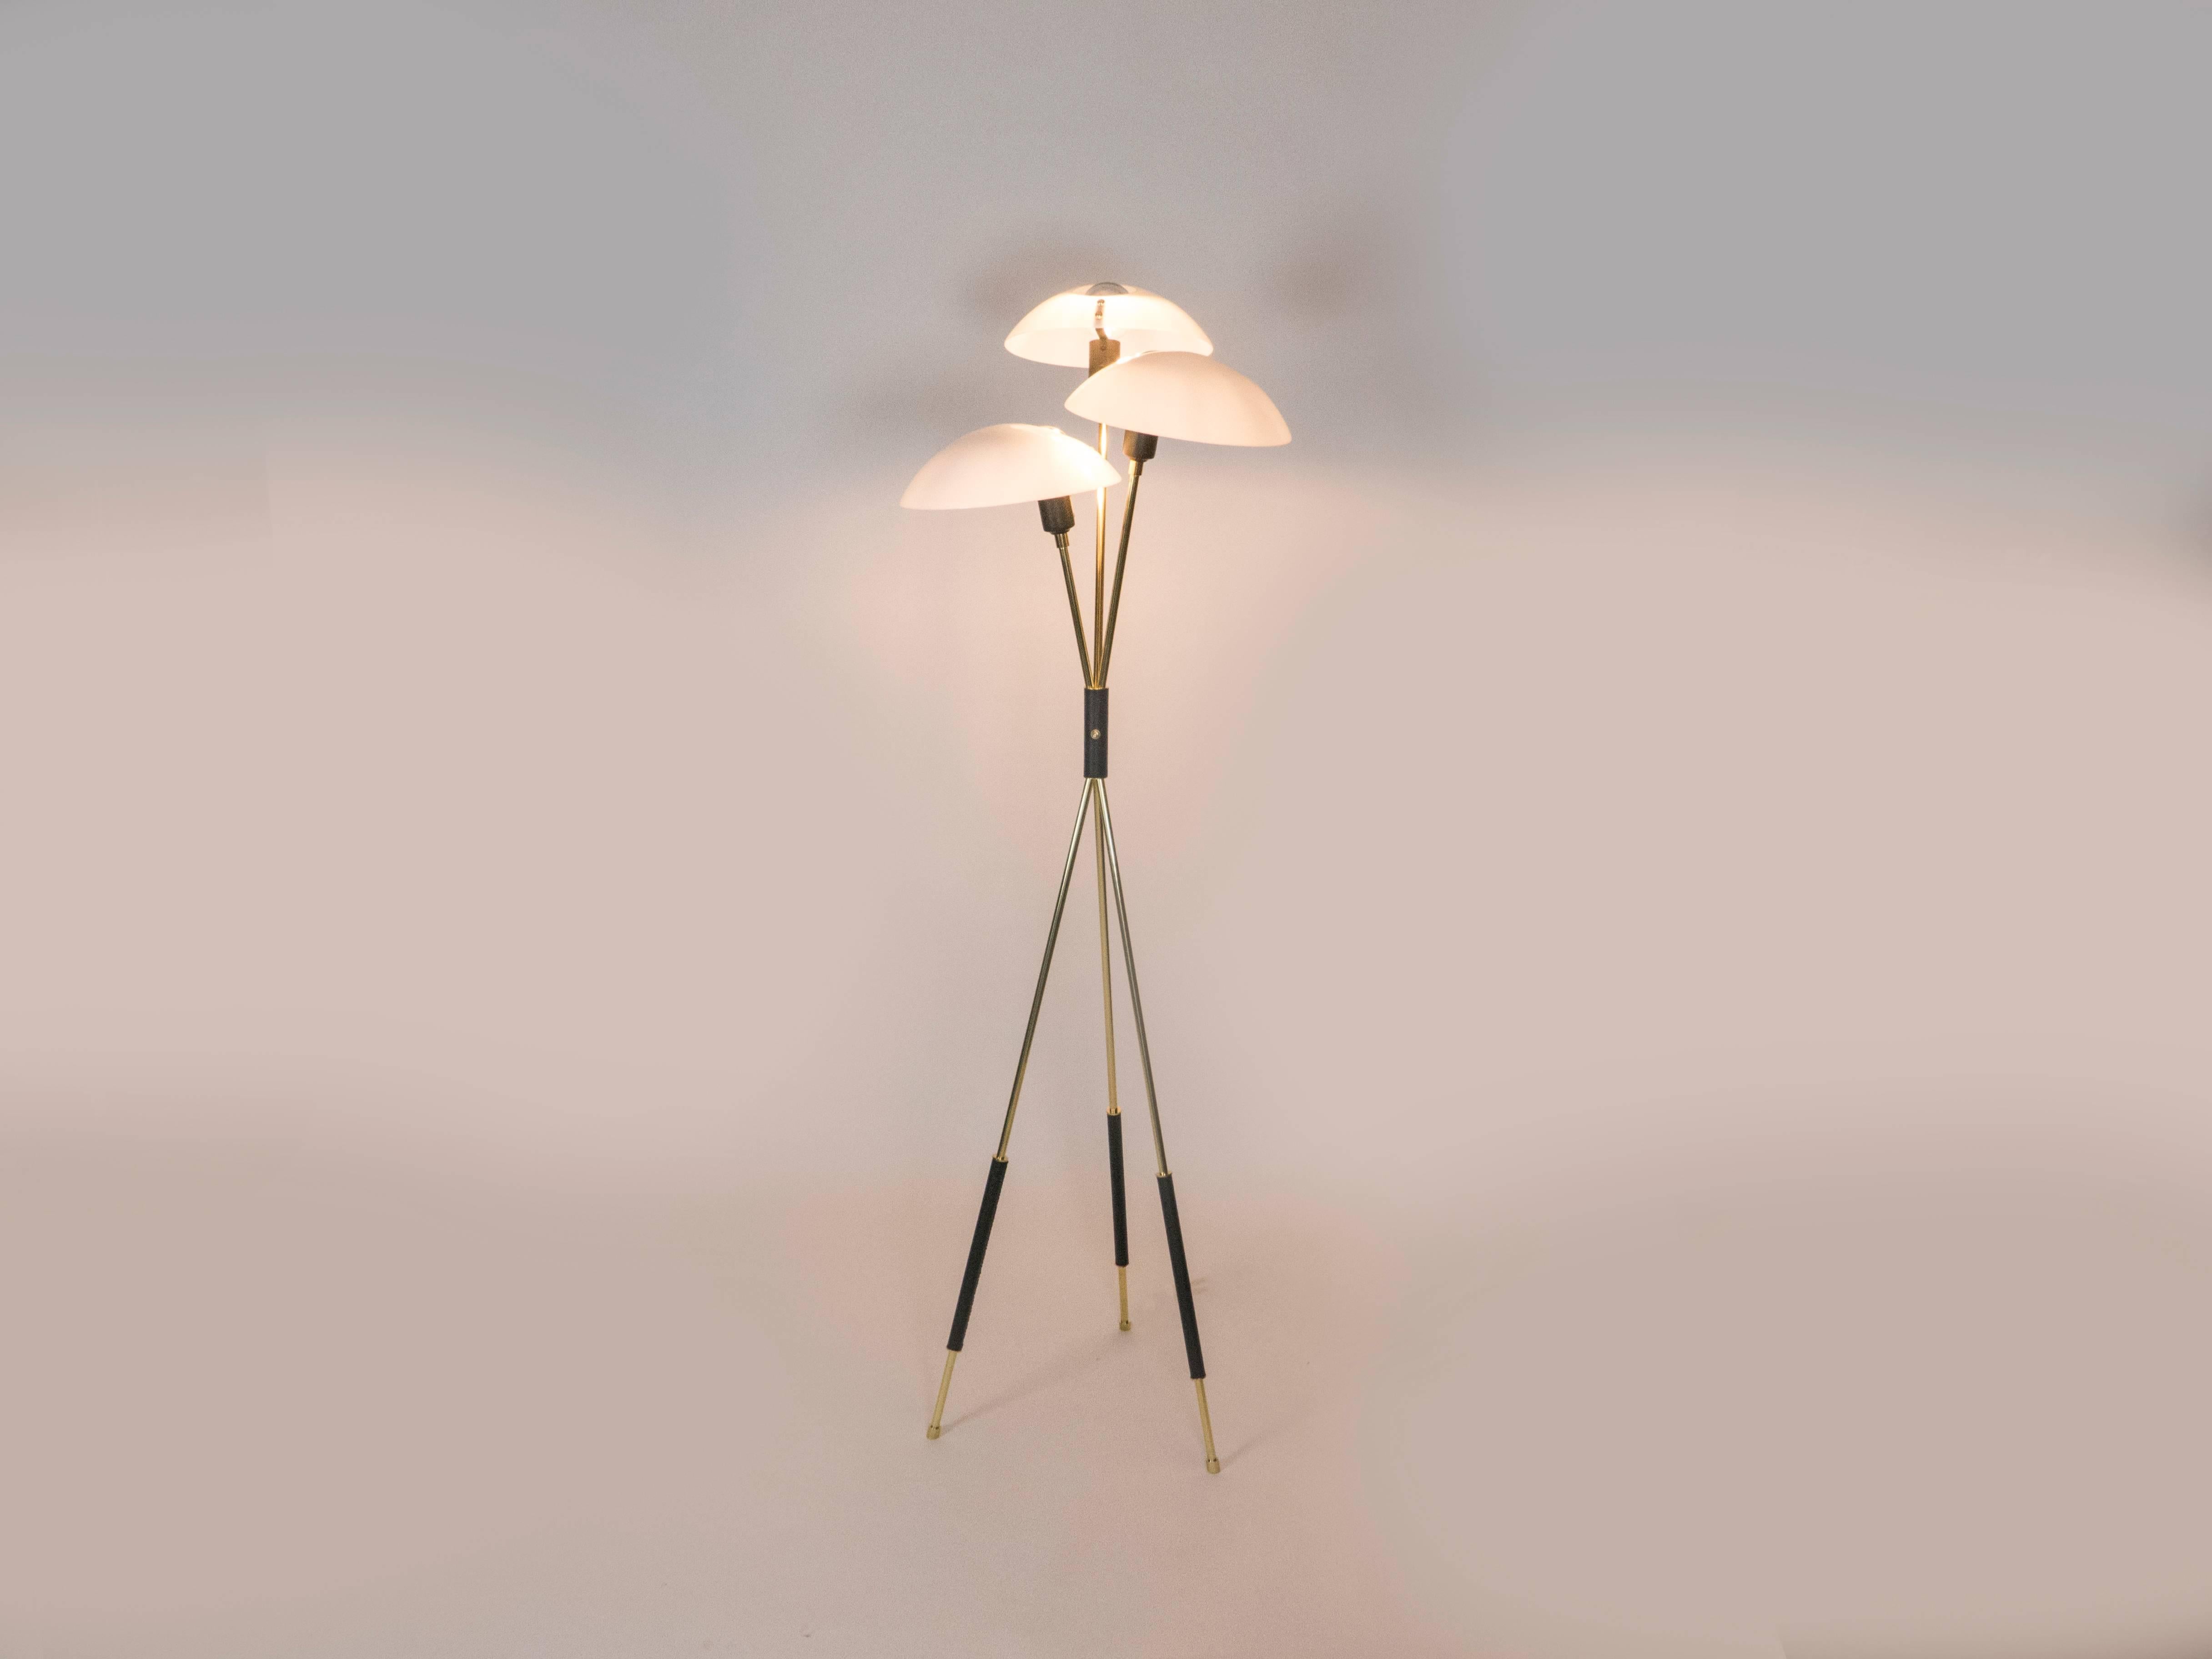 This elegant tripod floor lamp has a mid-century inspired design. The lamp has a brass body with hand-stitched leather accents. The light is diffused by acrylic diffusers which provide for direct down light and a soft diffused light in the room. The